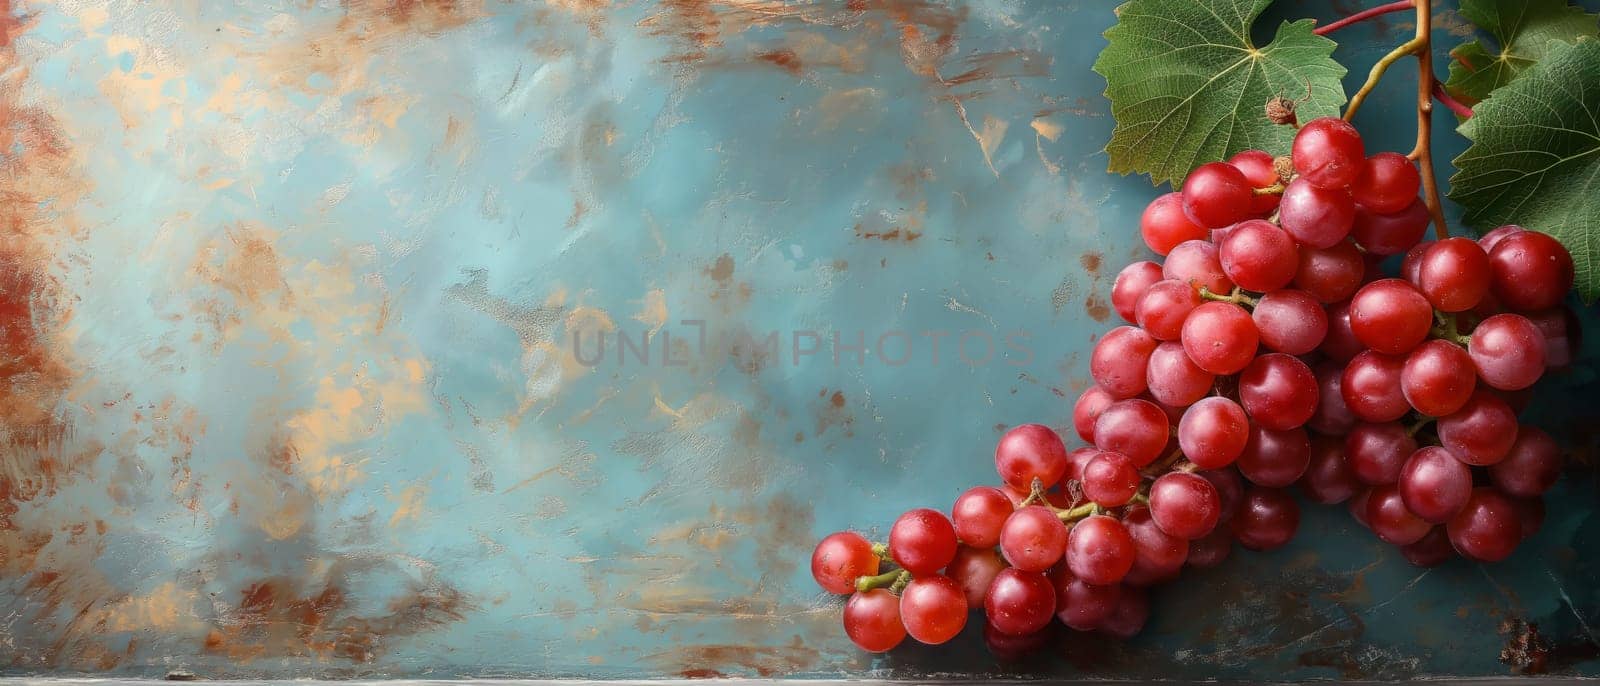 Branch of grapes on vintage background. by Fischeron